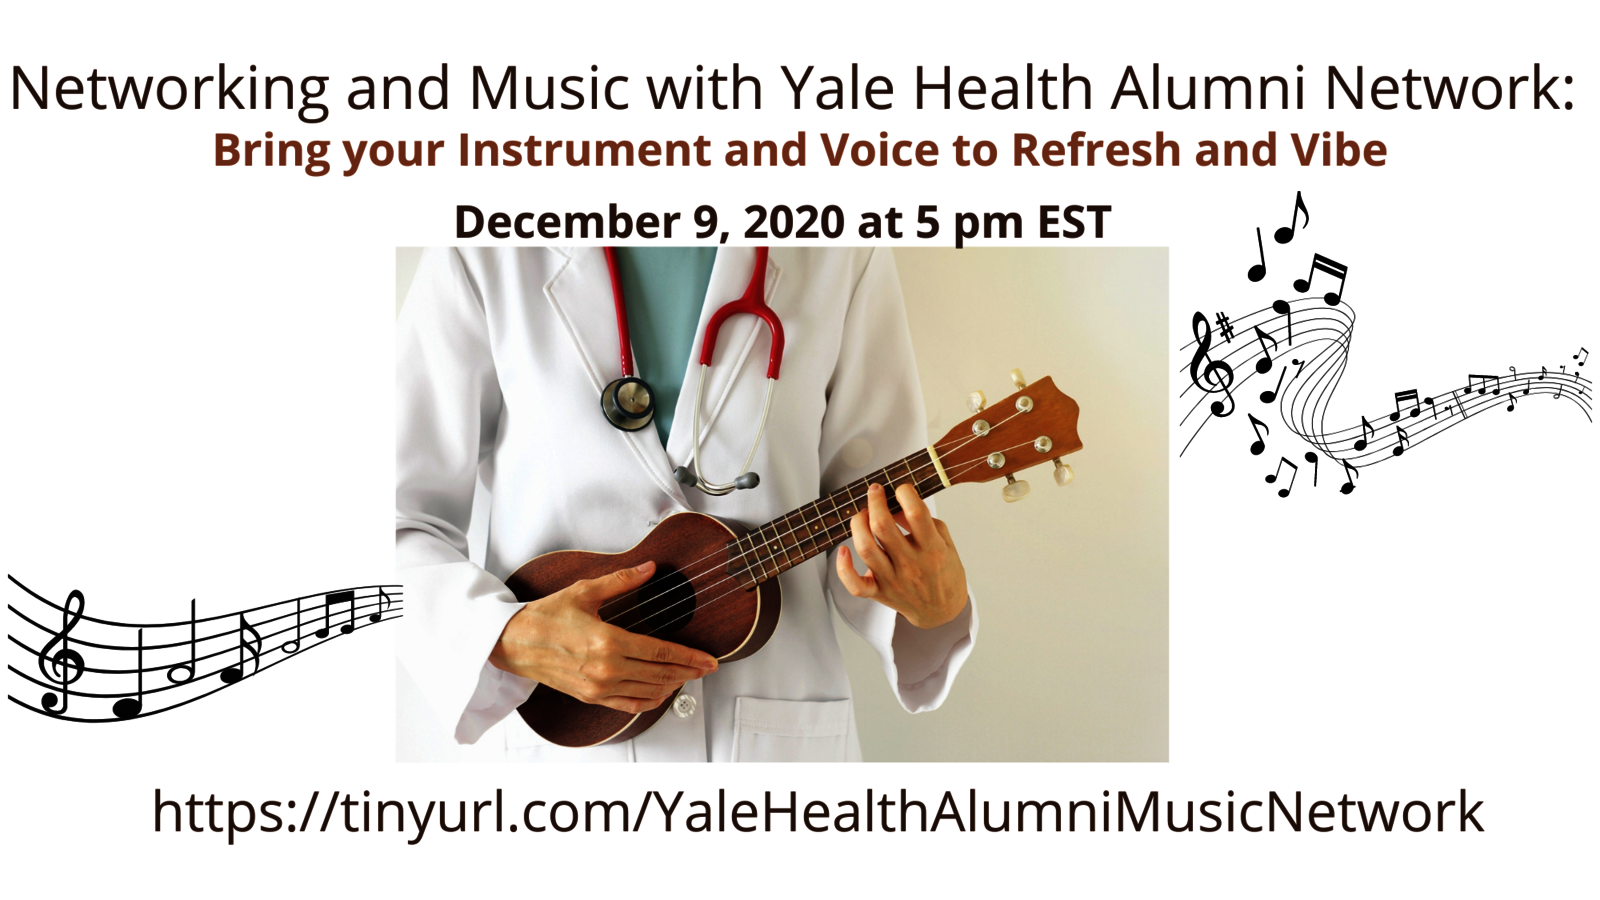 Networking and Music with Yale Alumni Health Network